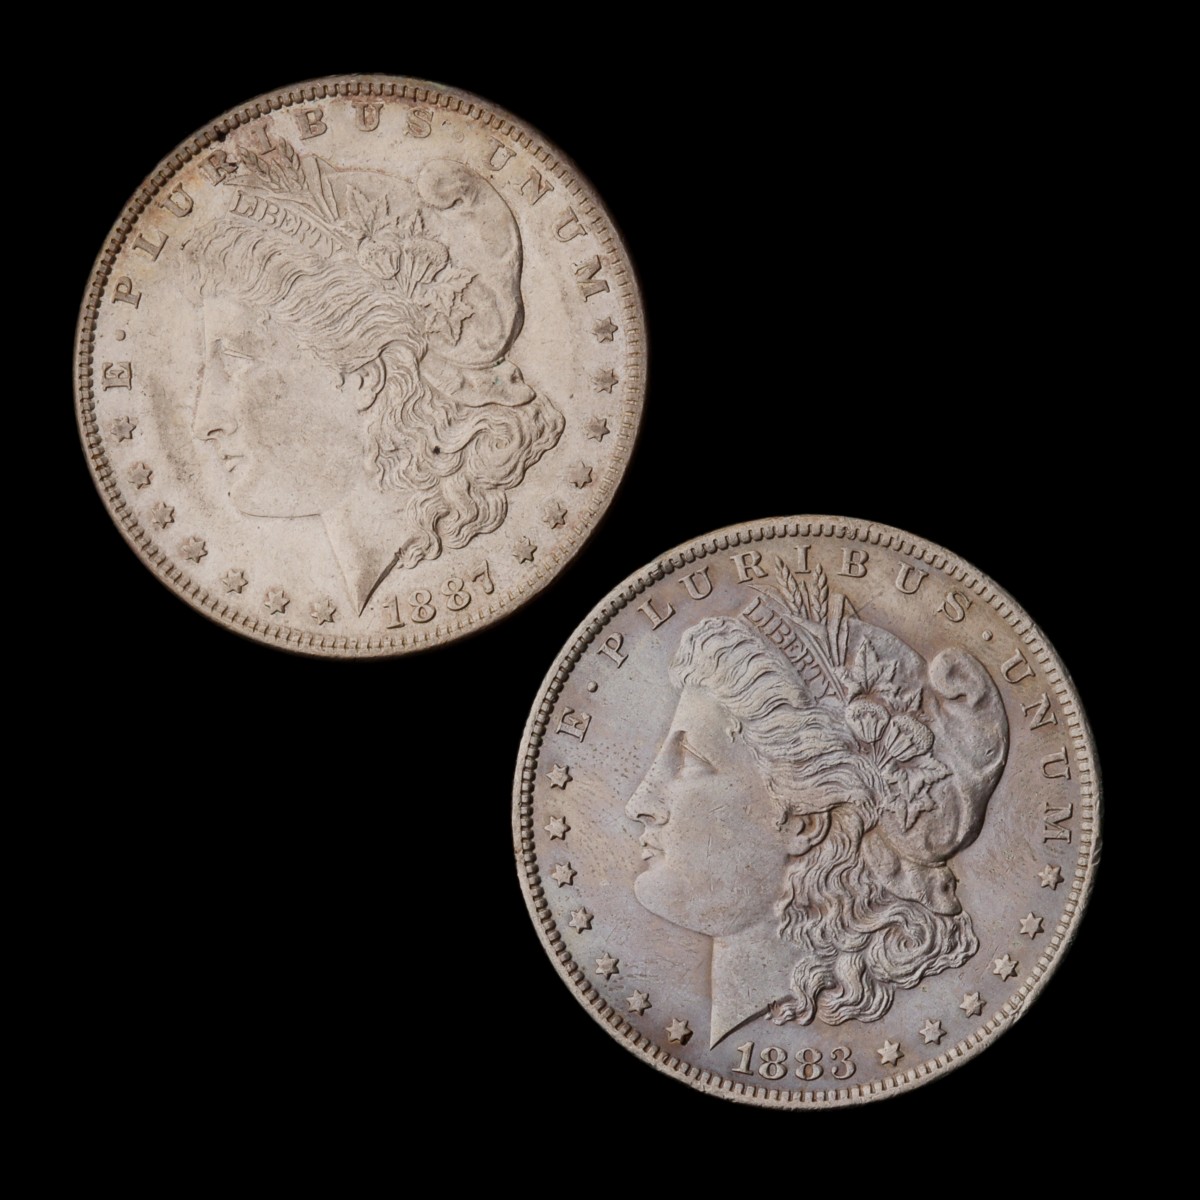 TWO HIGHER GRADE MORGAN SILVER DOLLARS, 1883-O AND 1887